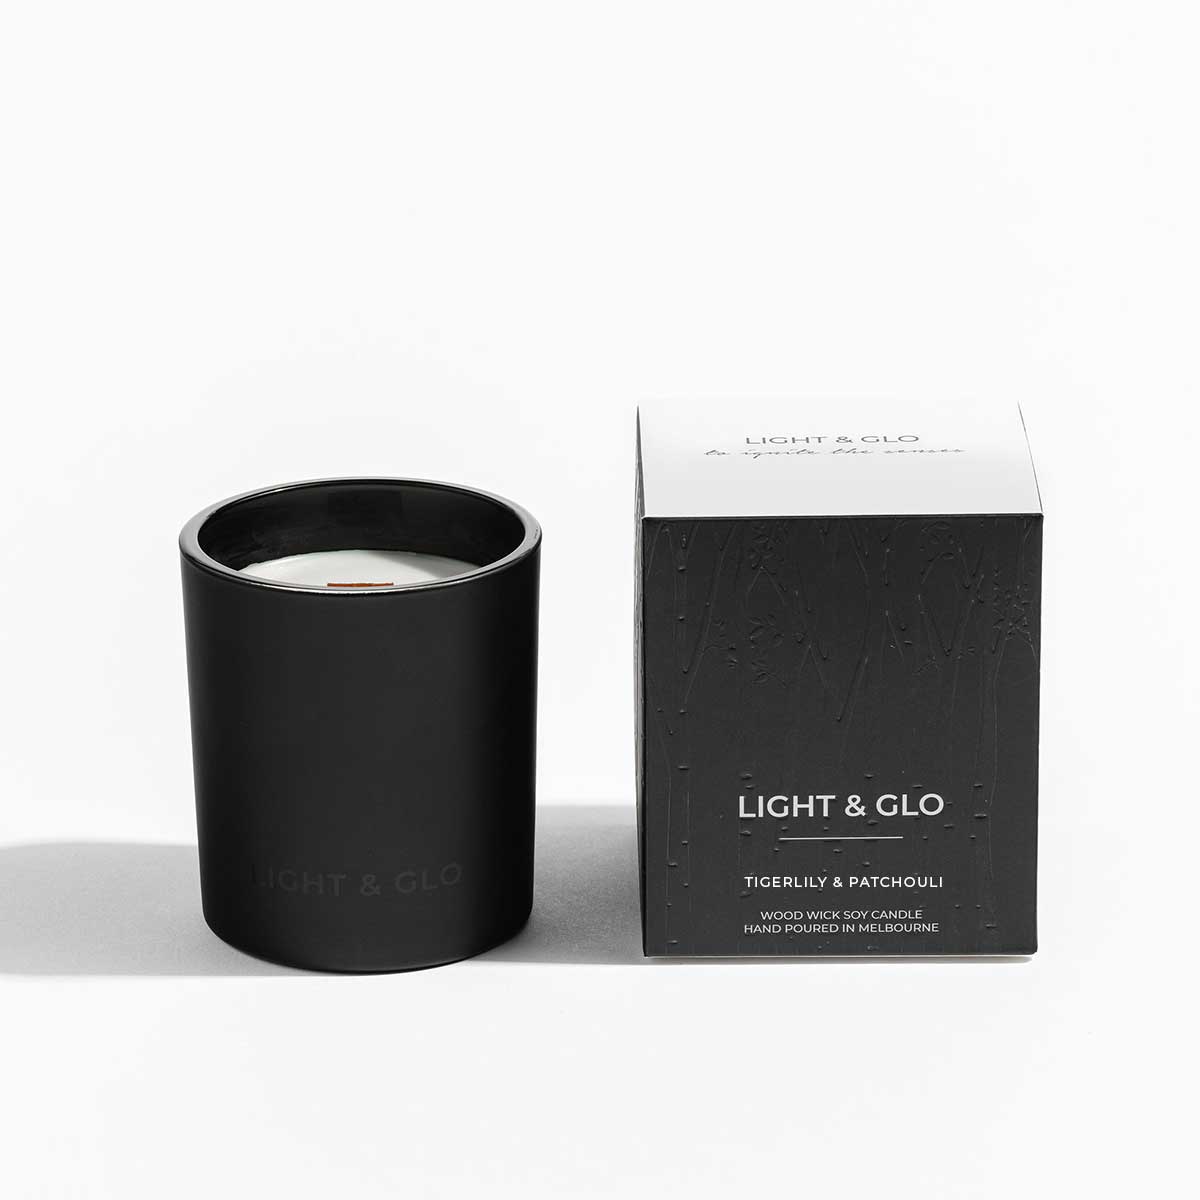 Tiger Lily & Patchouli - Monochrome Large 300g Candle | Luxury Candles & Home Fragrances by Light + Glo